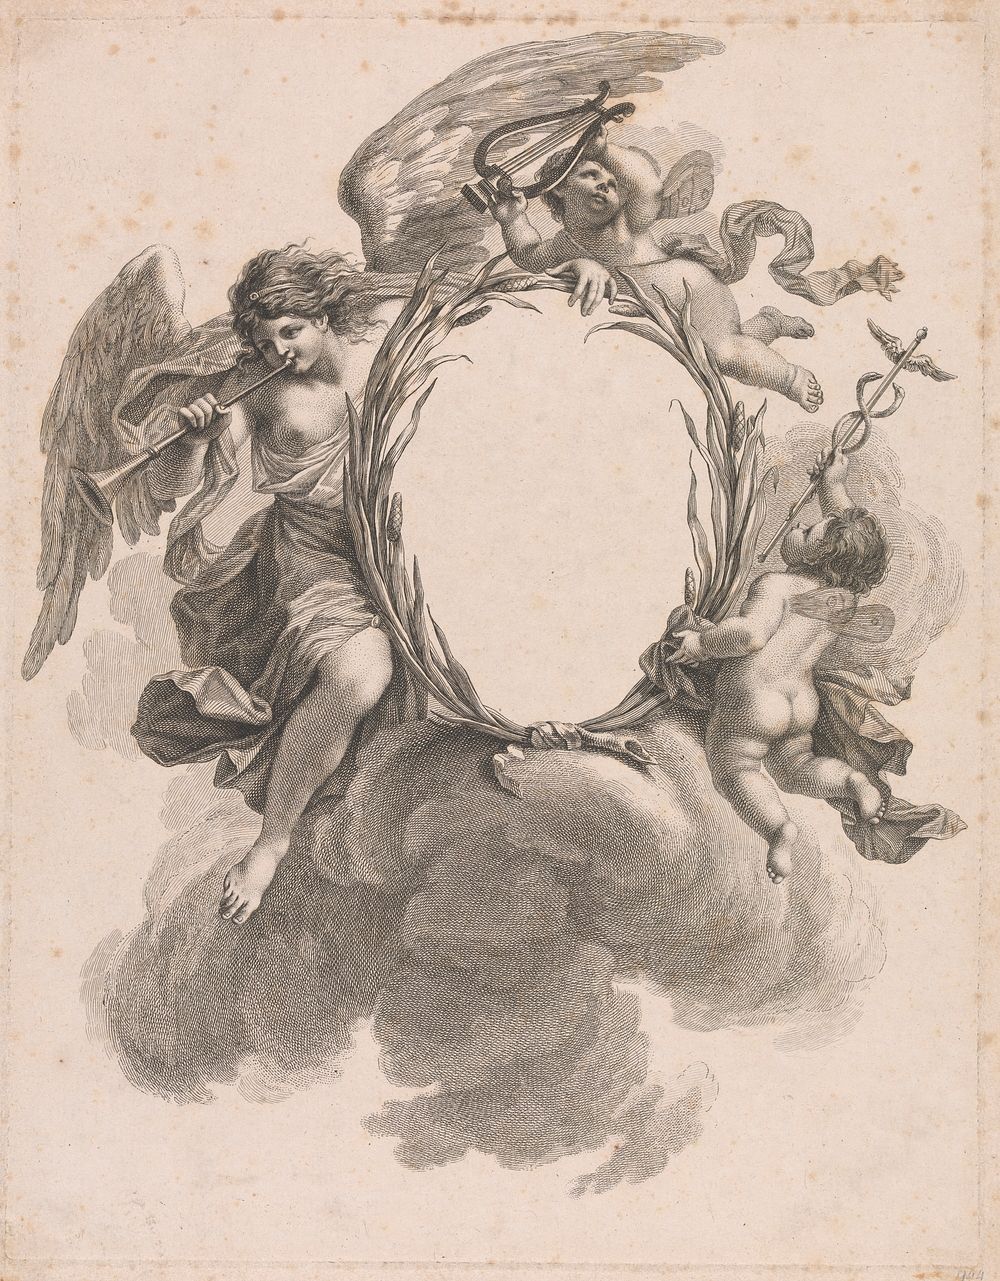 Vignette With Putti Carrying Hermes Staff And Lyre And Angel Blowing Trumpet, Three Muses by Francesco Bartolozzi 